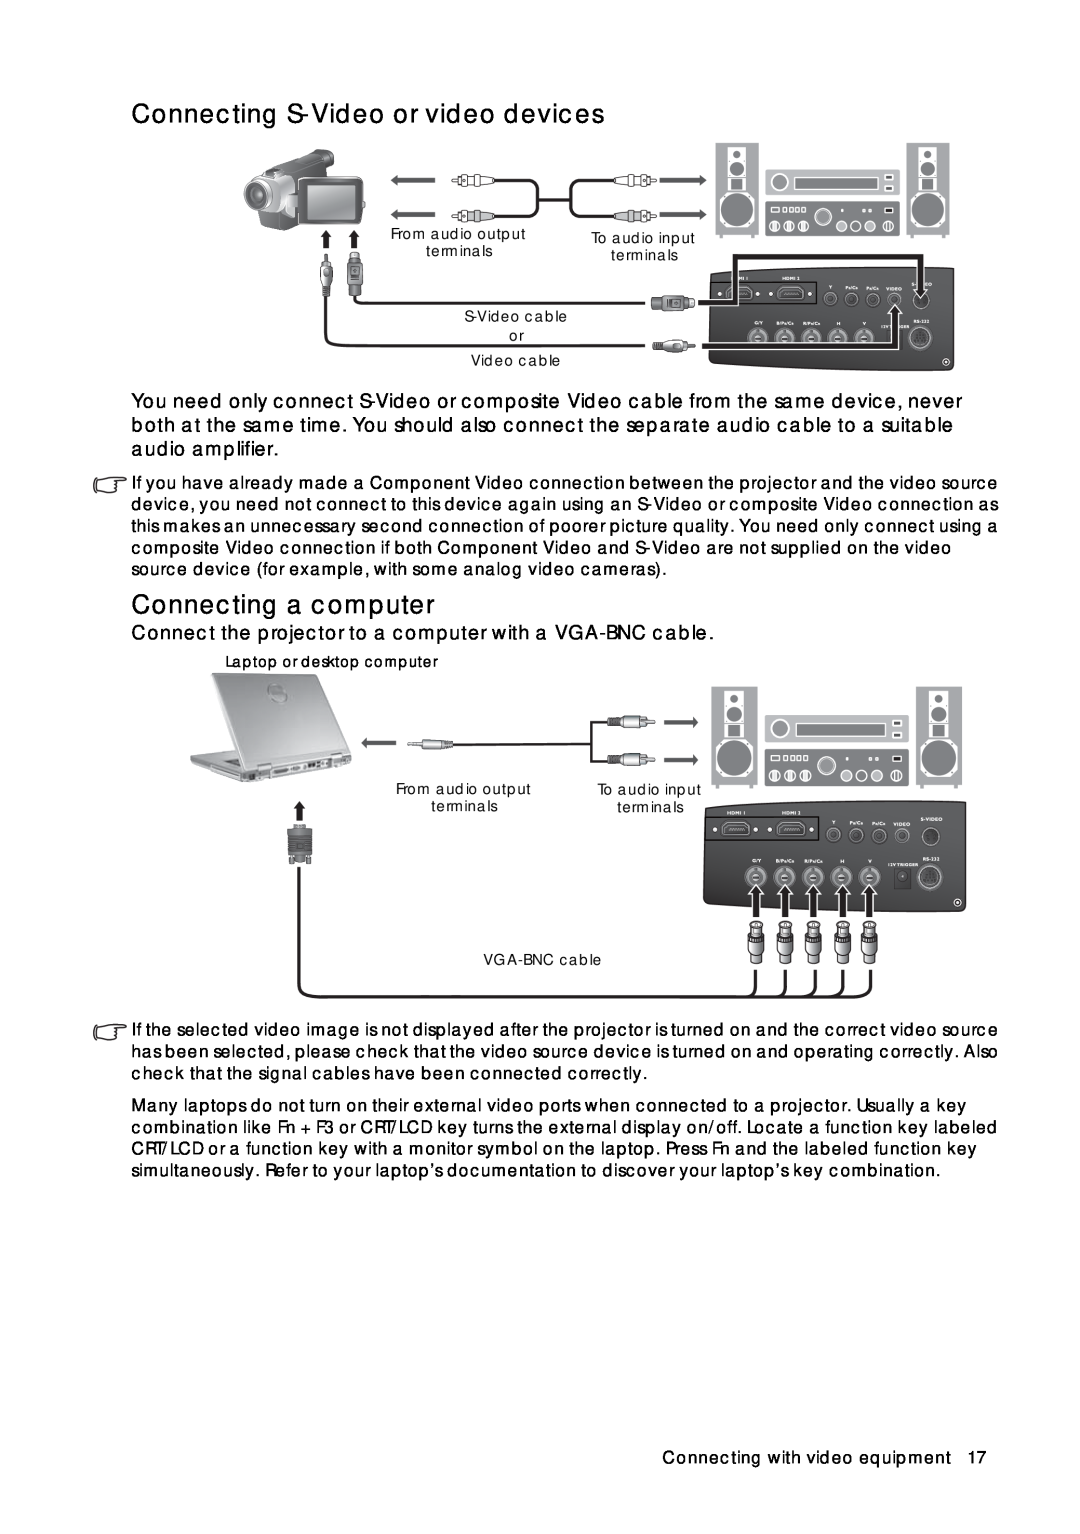 Sim2 Multimedia D60 user manual Connecting S-Video or video devices, Connecting a computer 